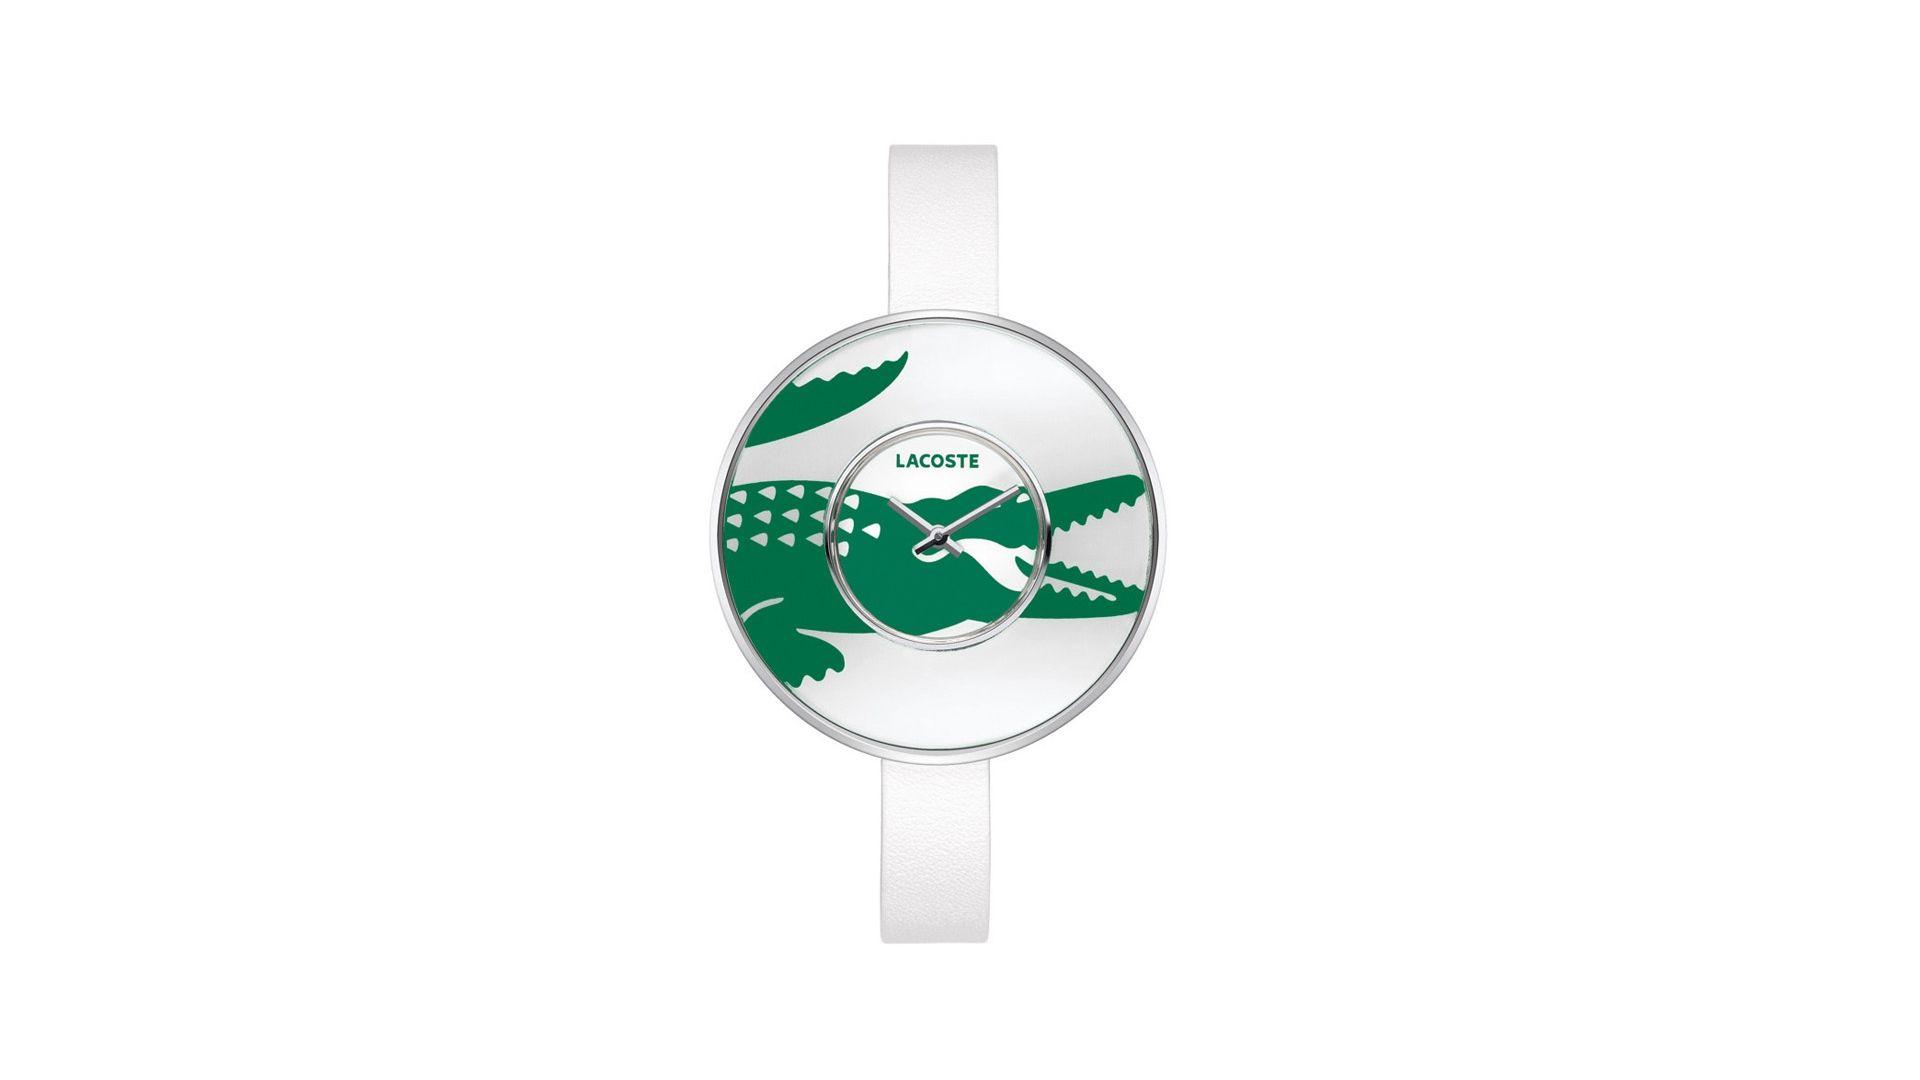 Lacoste Logo Wallpapers Wallpaper Cave